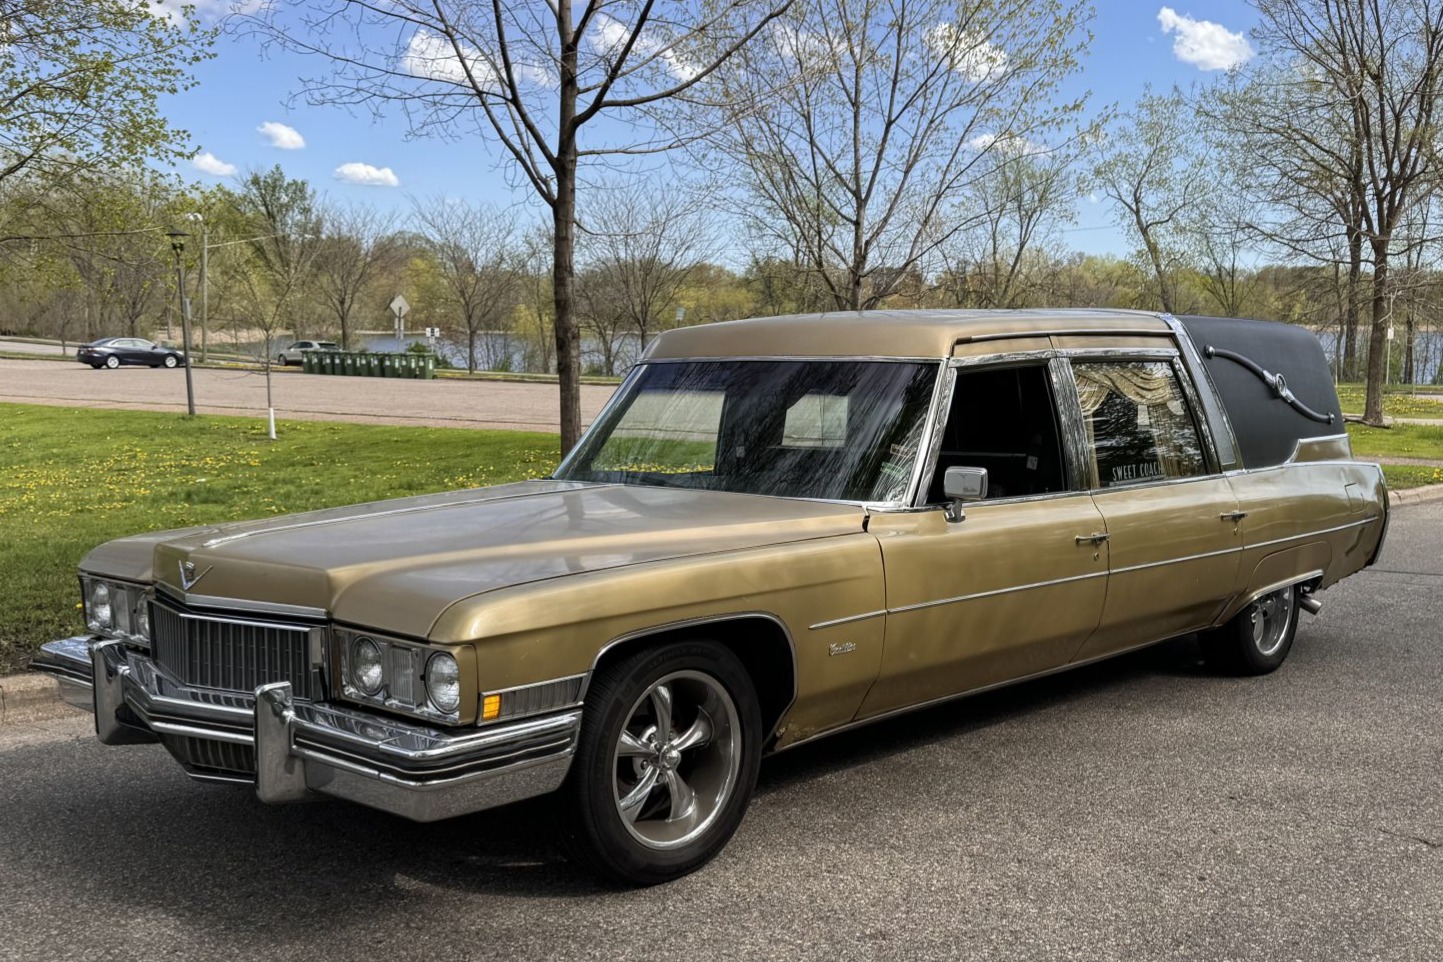 Used 1973 Cadillac Hearse by Superior Review